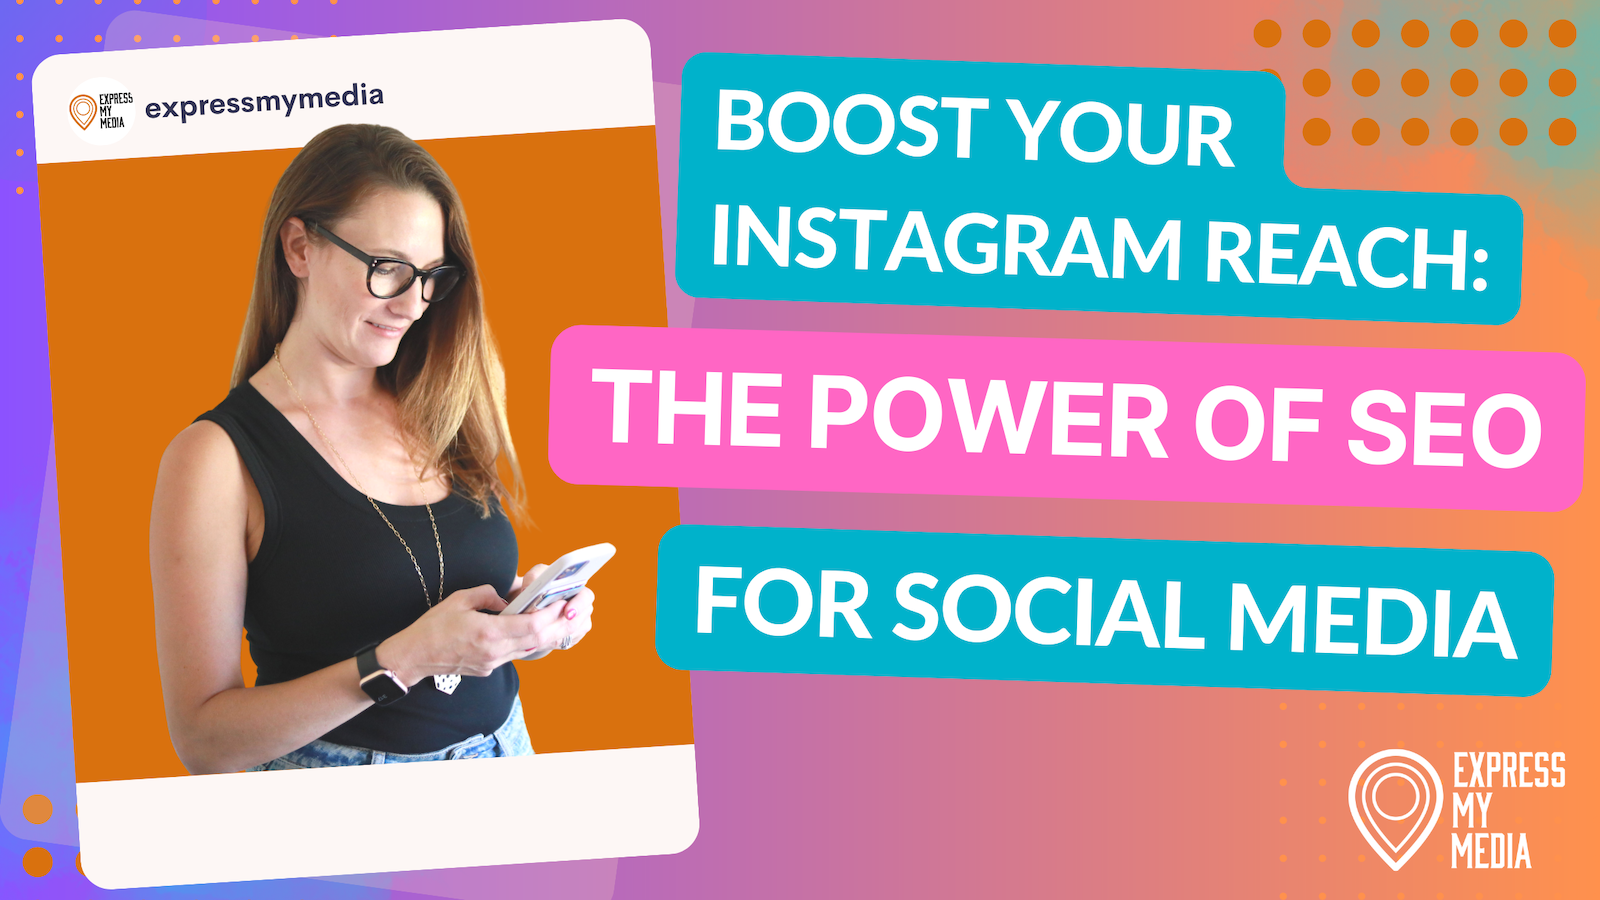 Boost instagram with SEO for social media